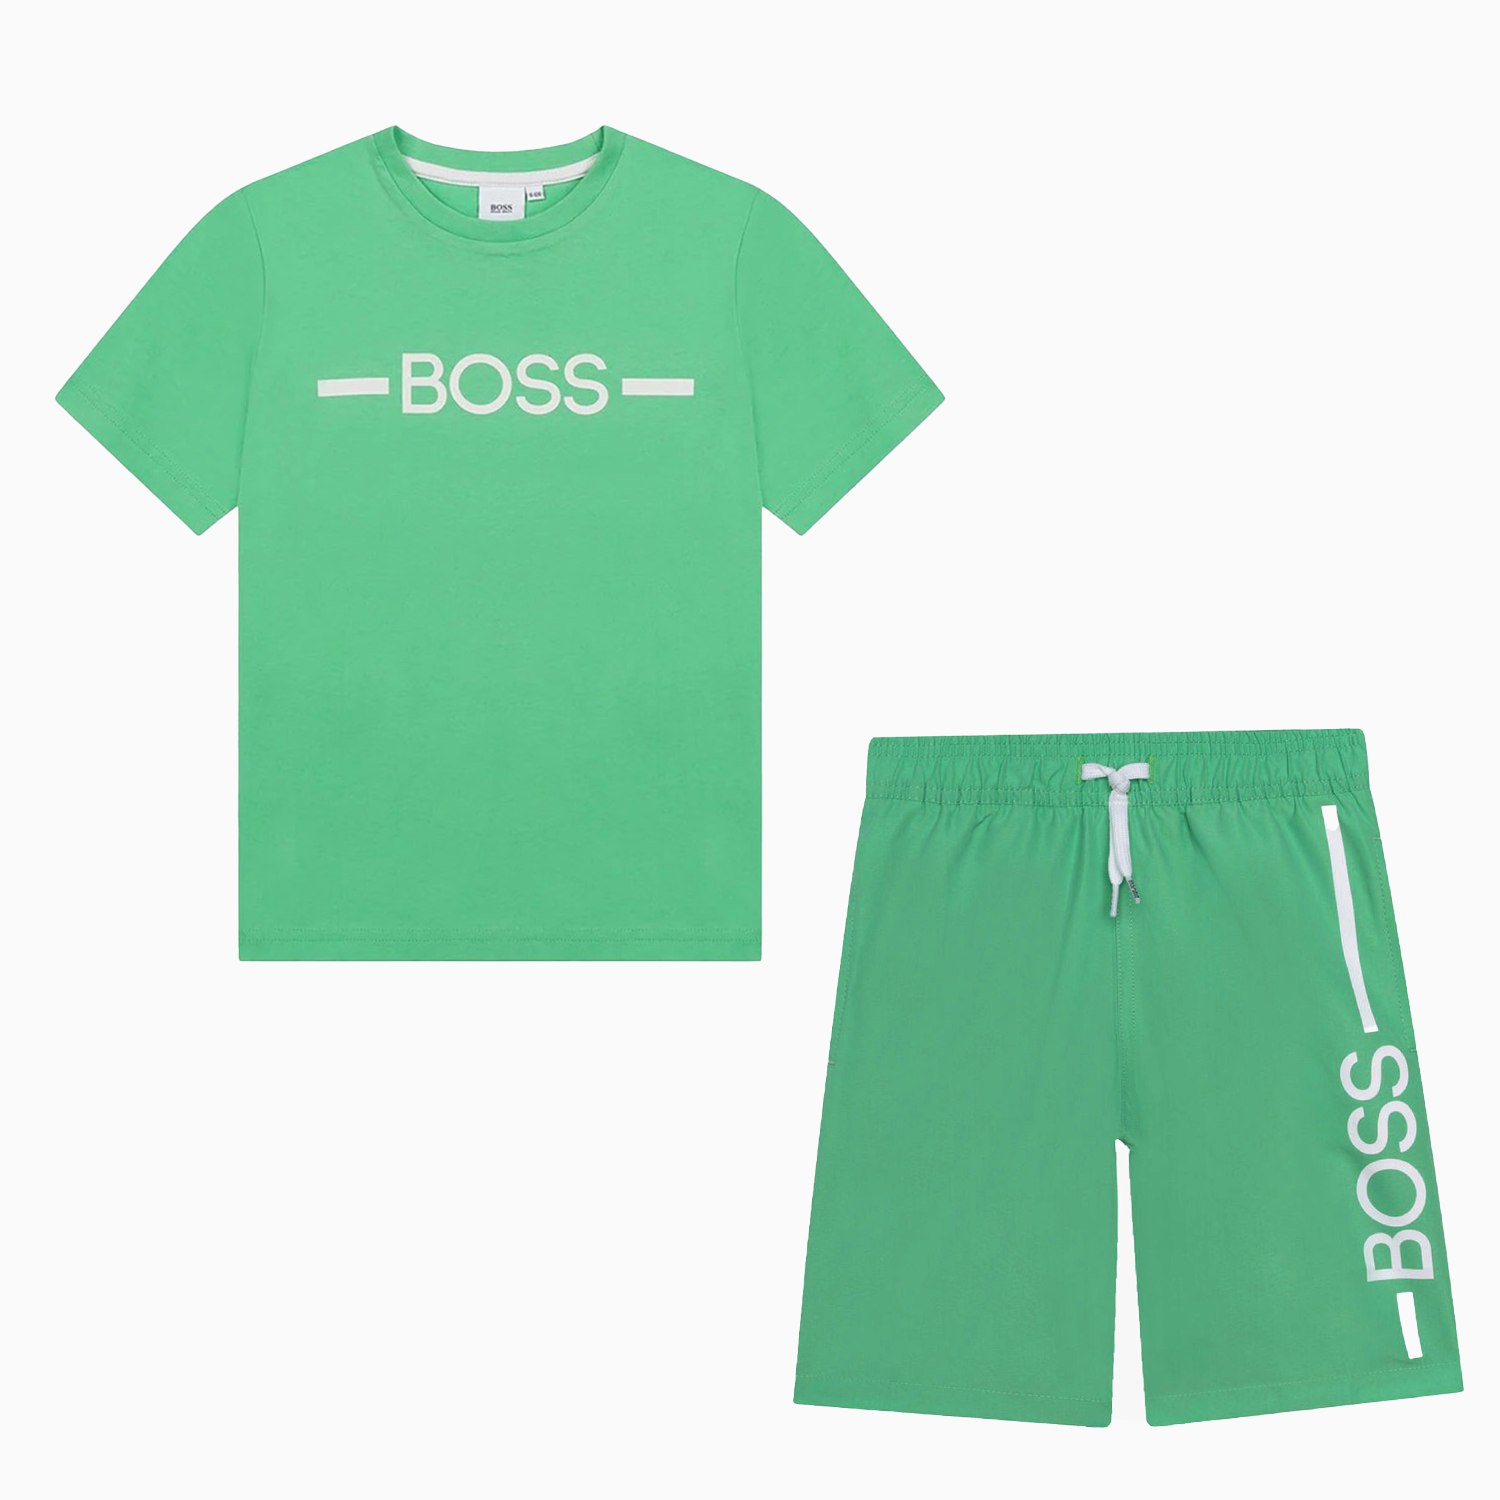 Hugo Boss Kid's Surfer Outfit - Color: Green - Kids Premium Clothing -